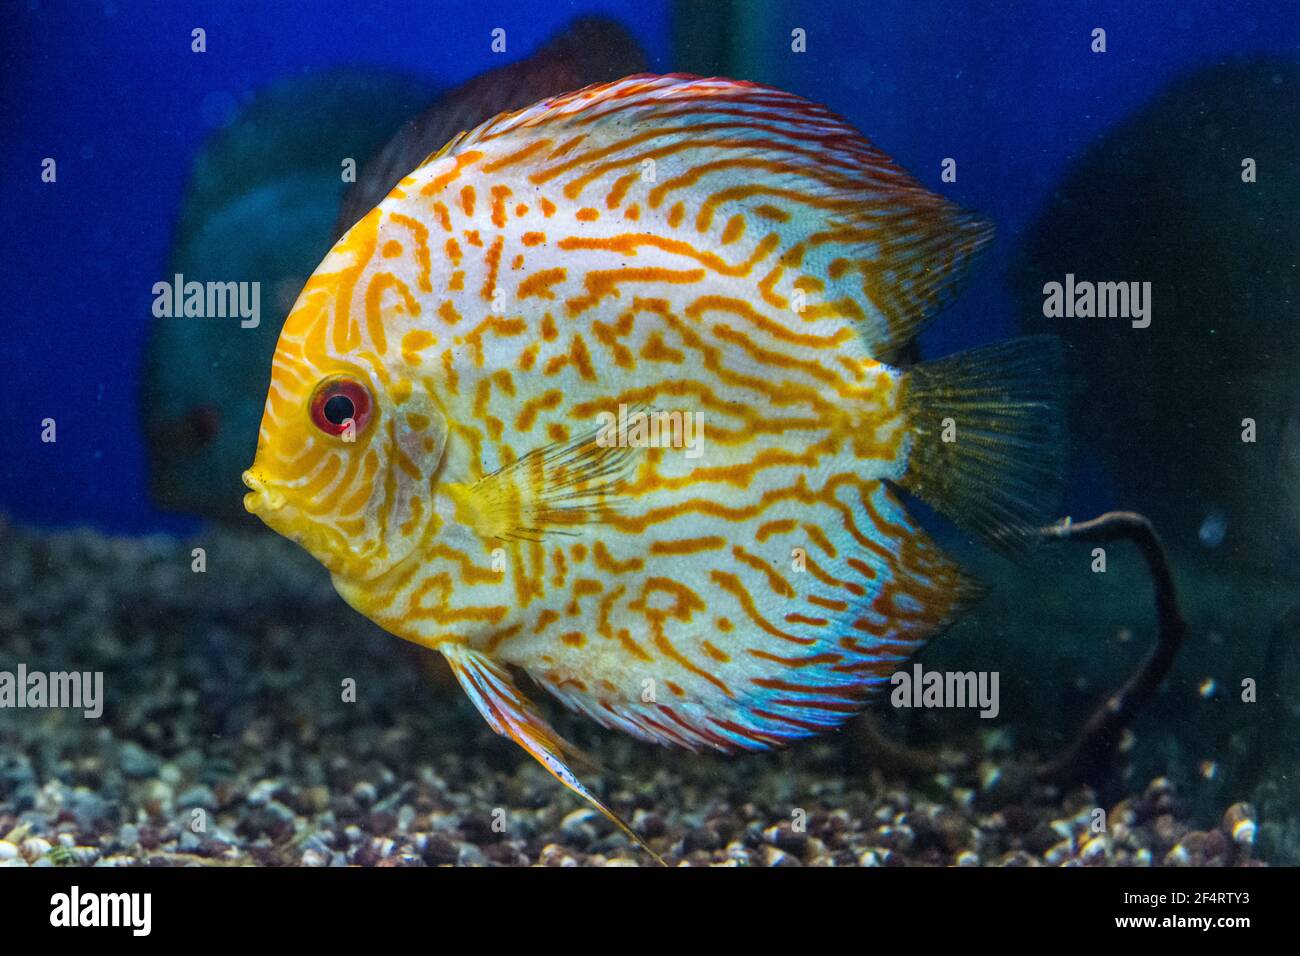 Symphysodon discus is swimming among mangrove roots Stock Photo